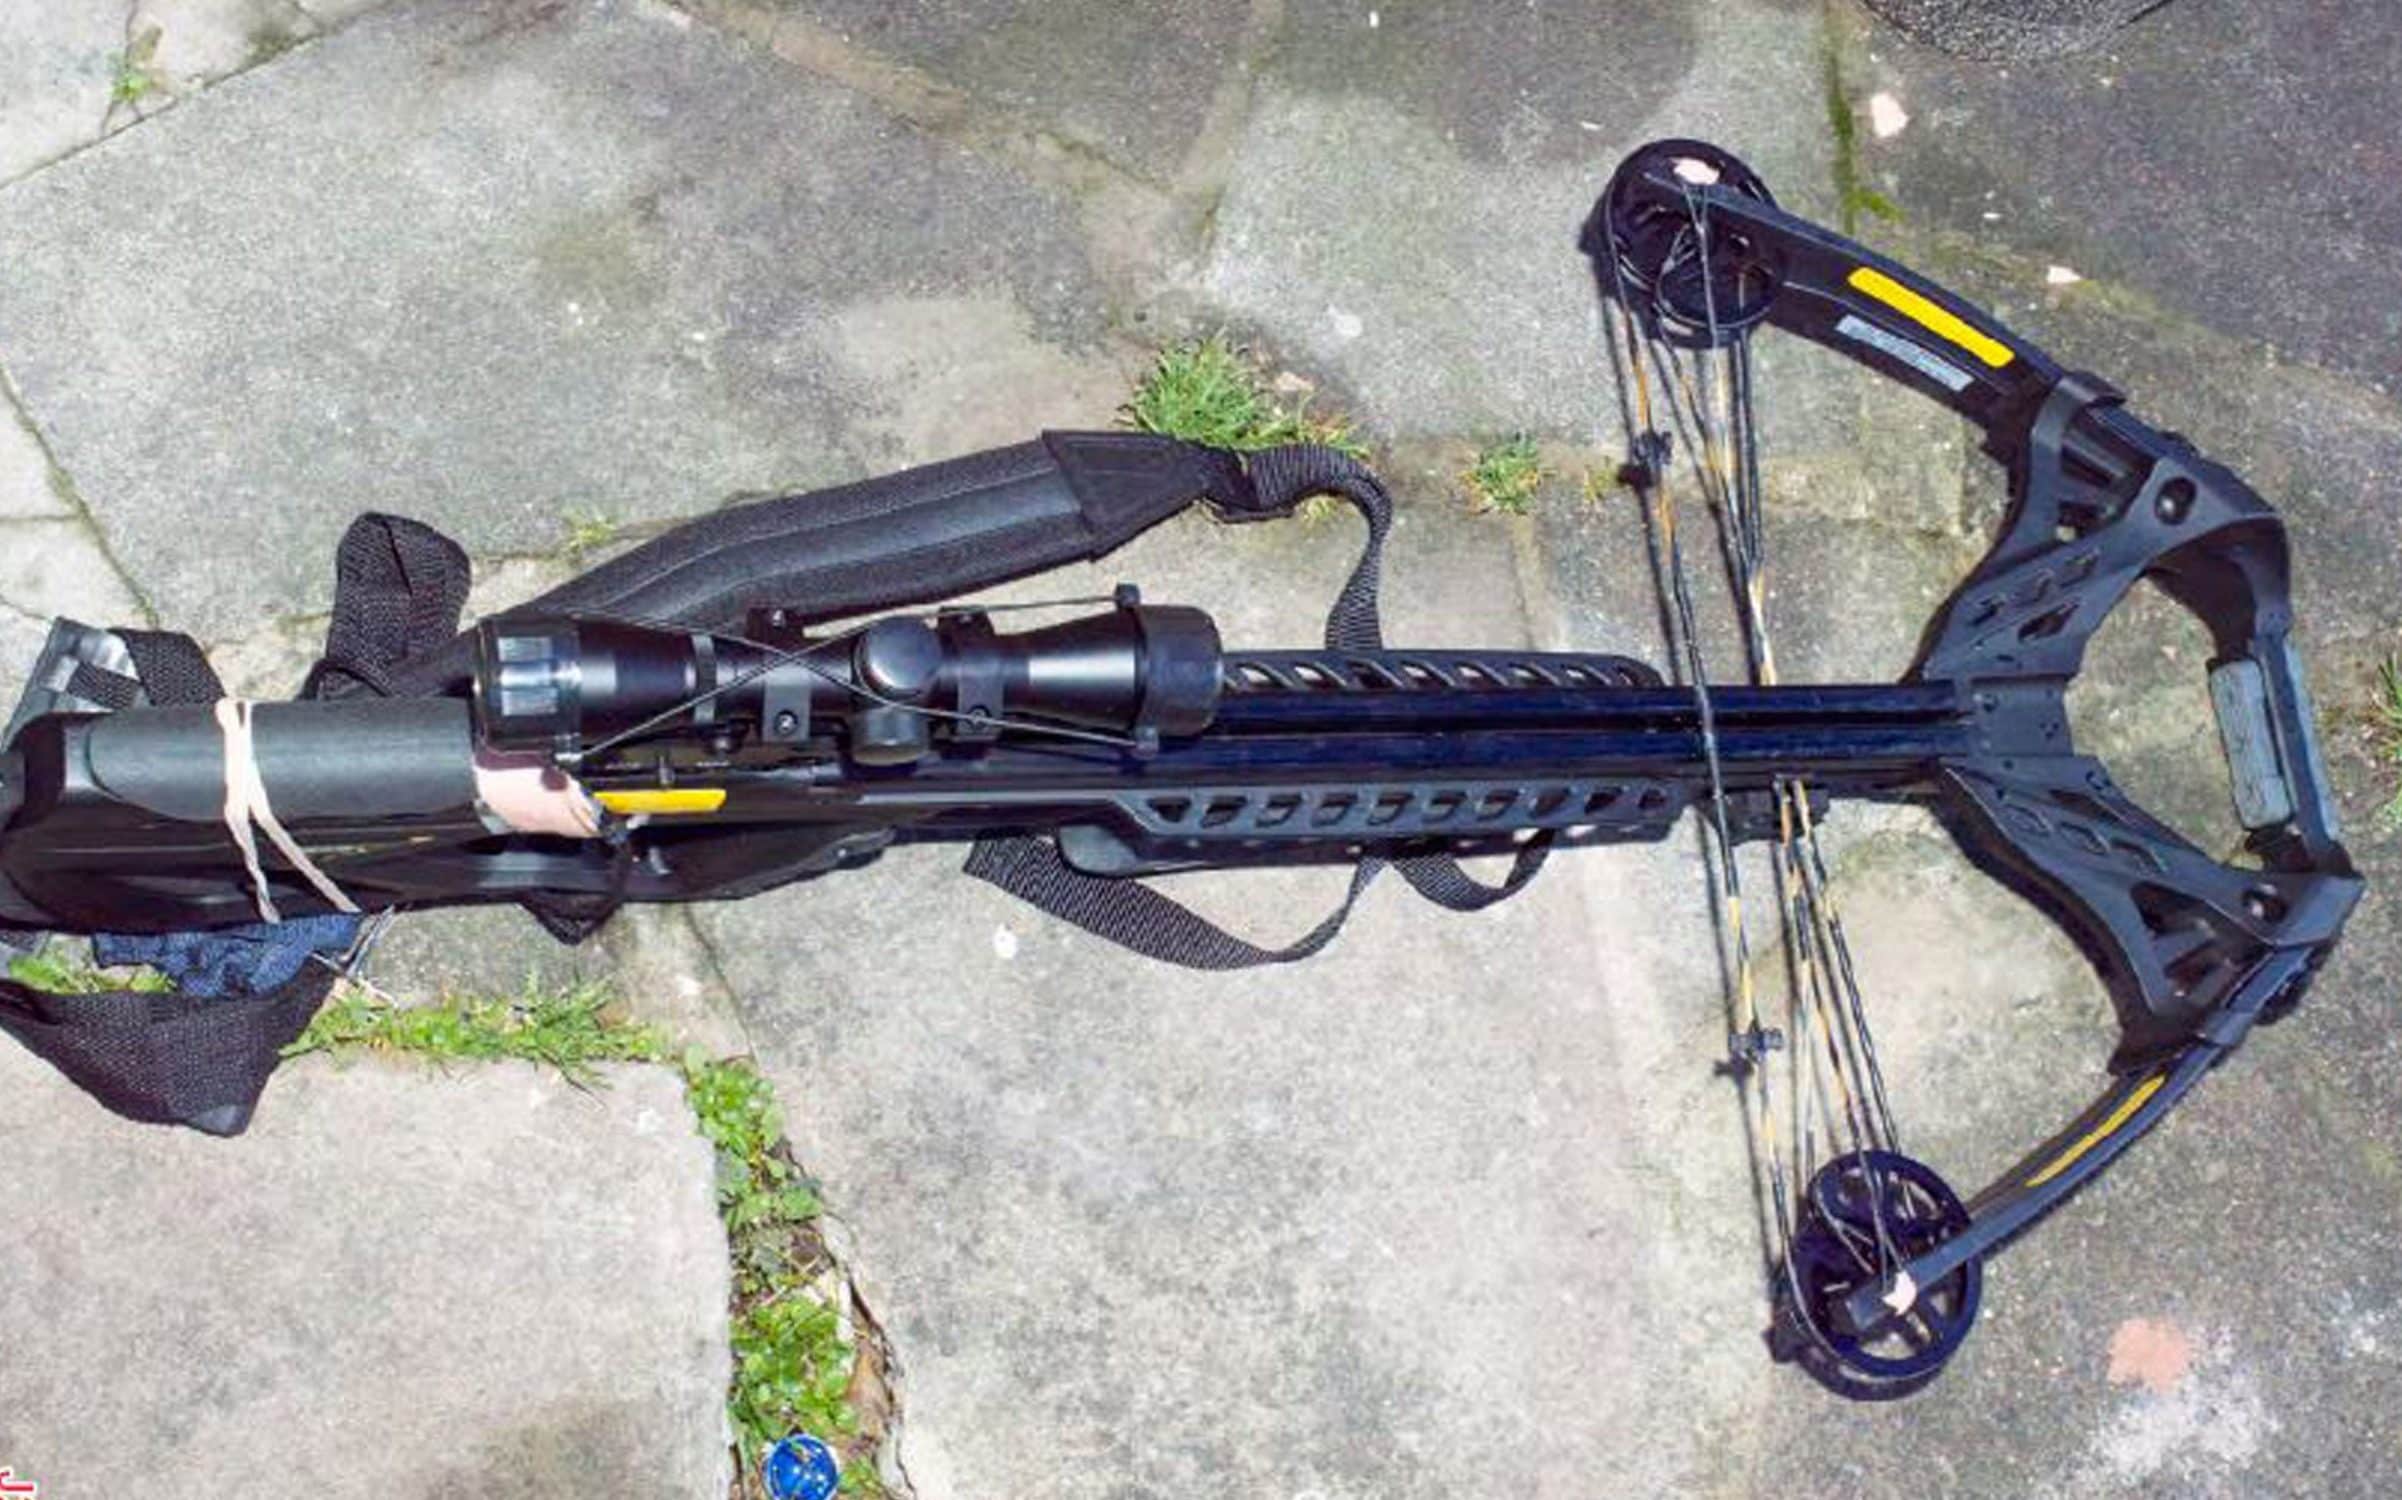 How a spate of crossbow crimes led to promises of a crackdown